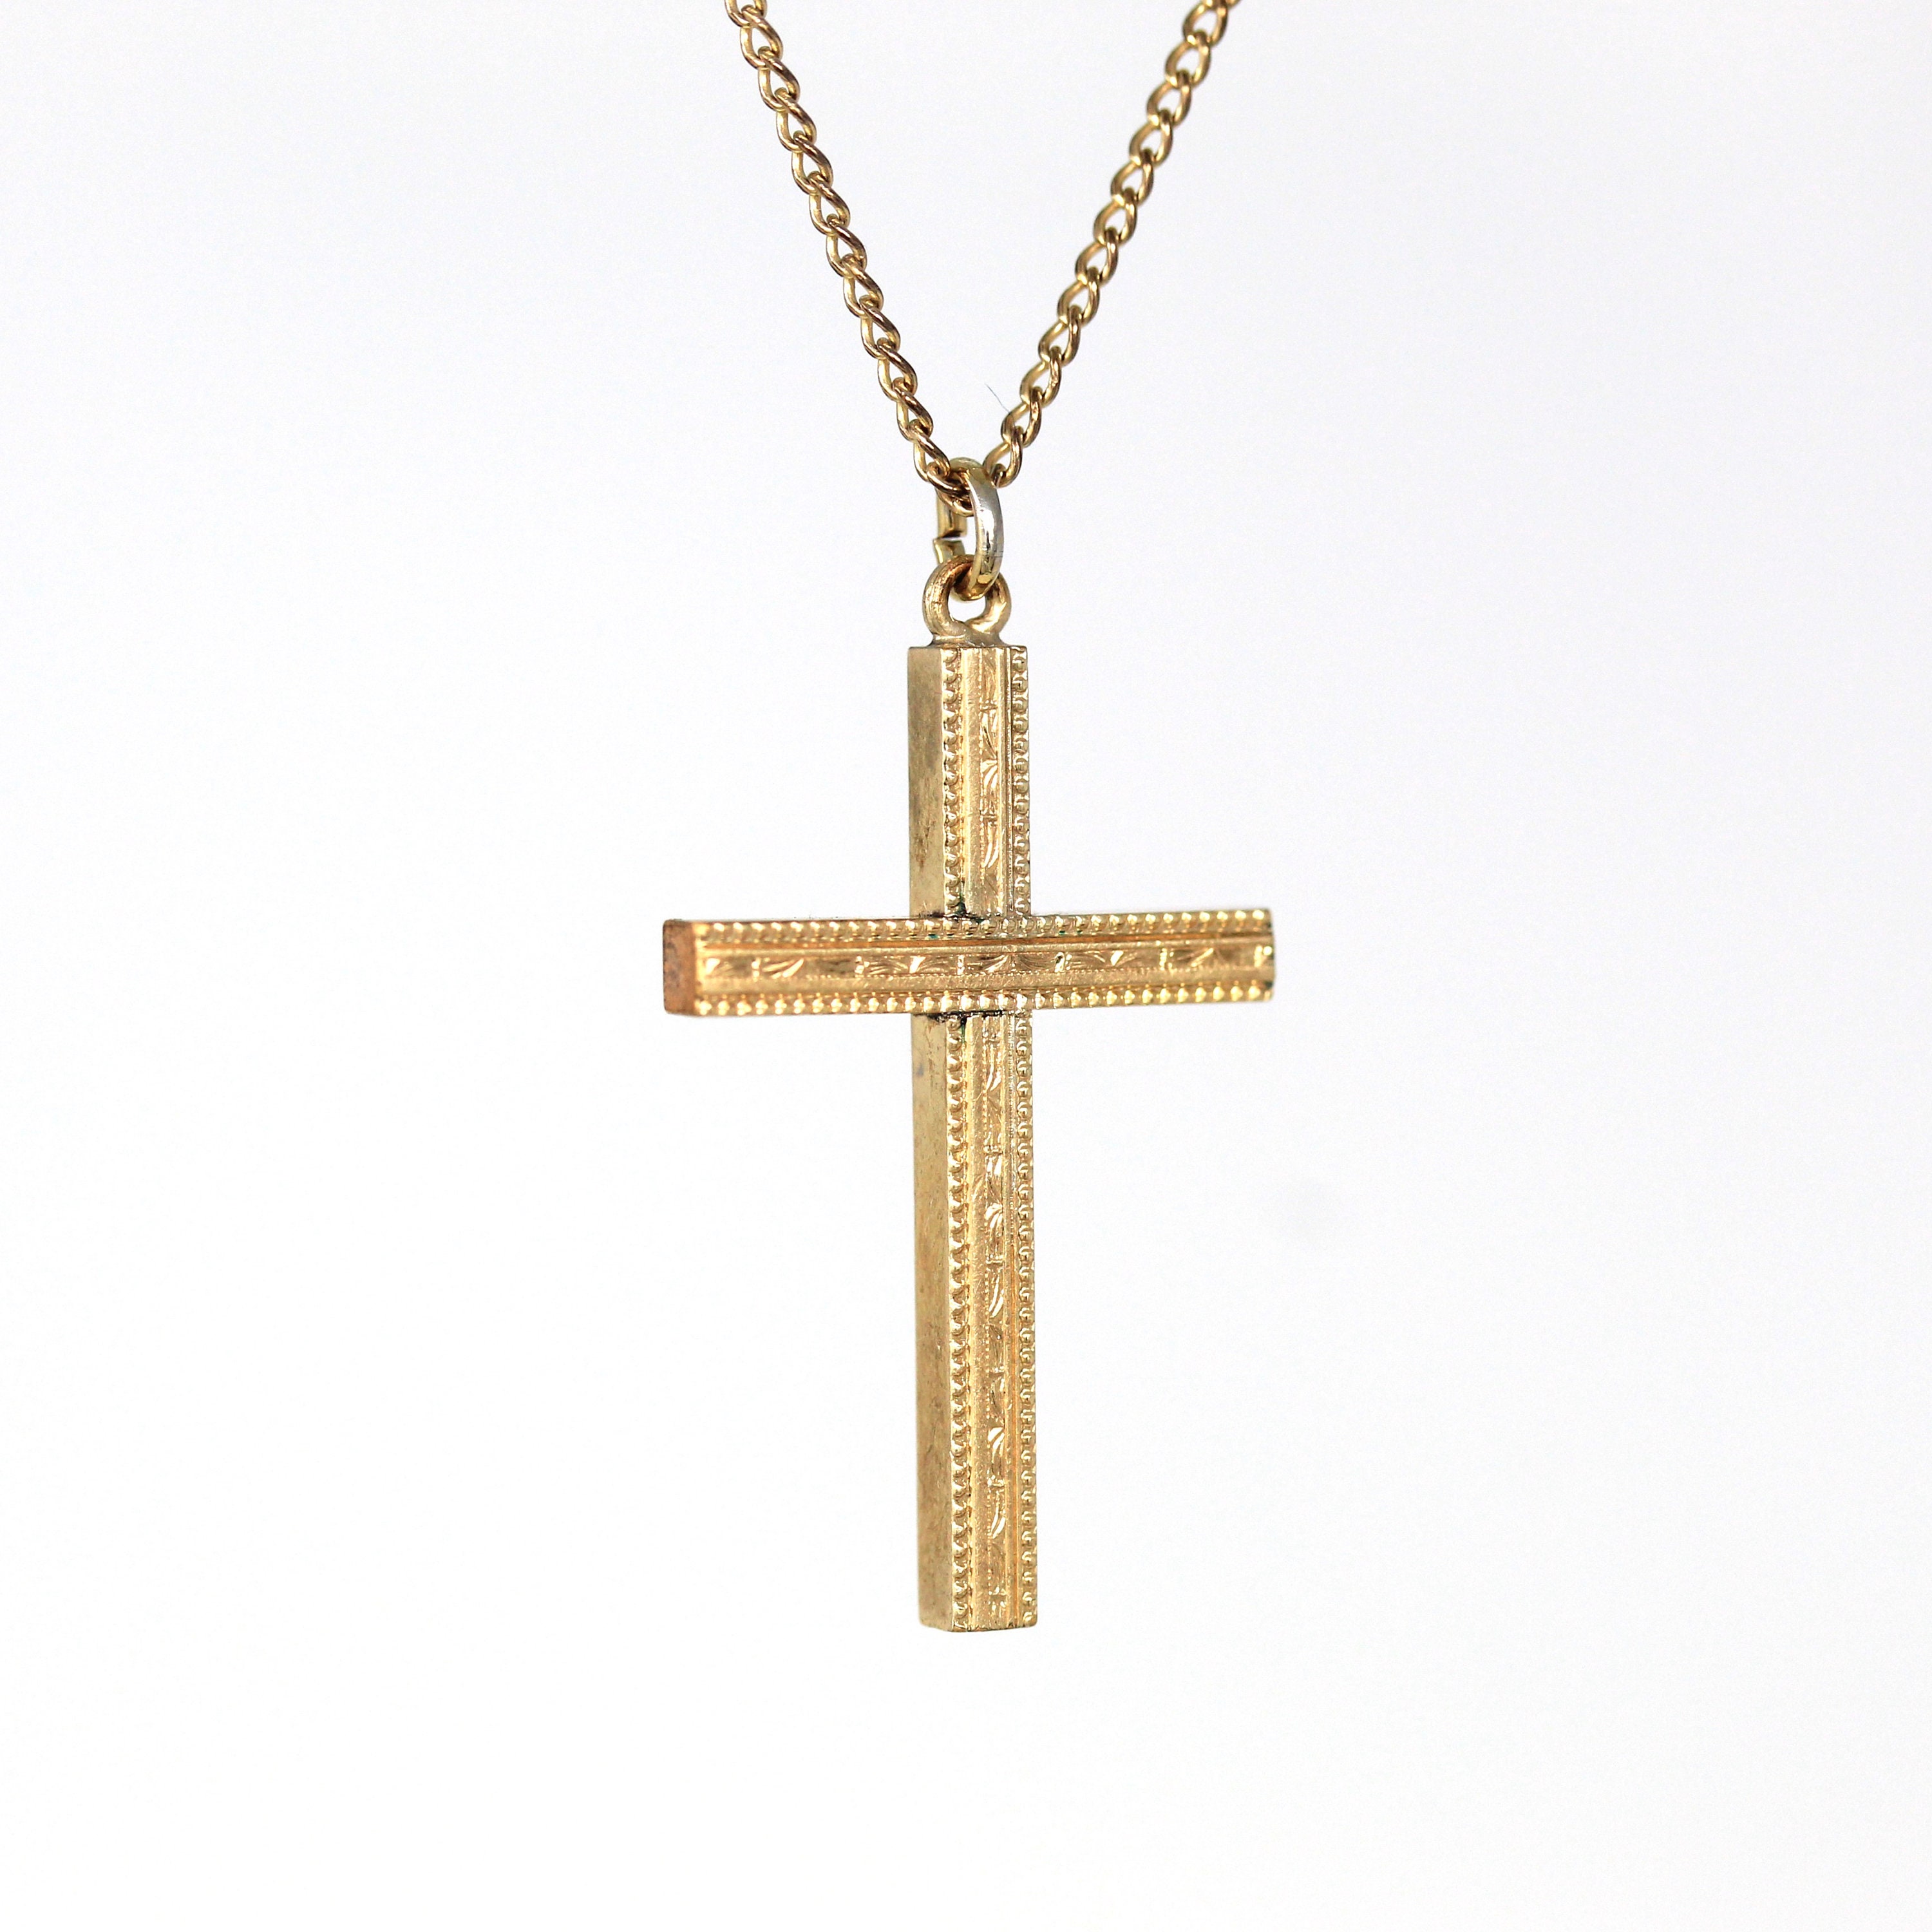 Vintage 12K Yellow Gold Filled Engraved Cross Pendant Charm